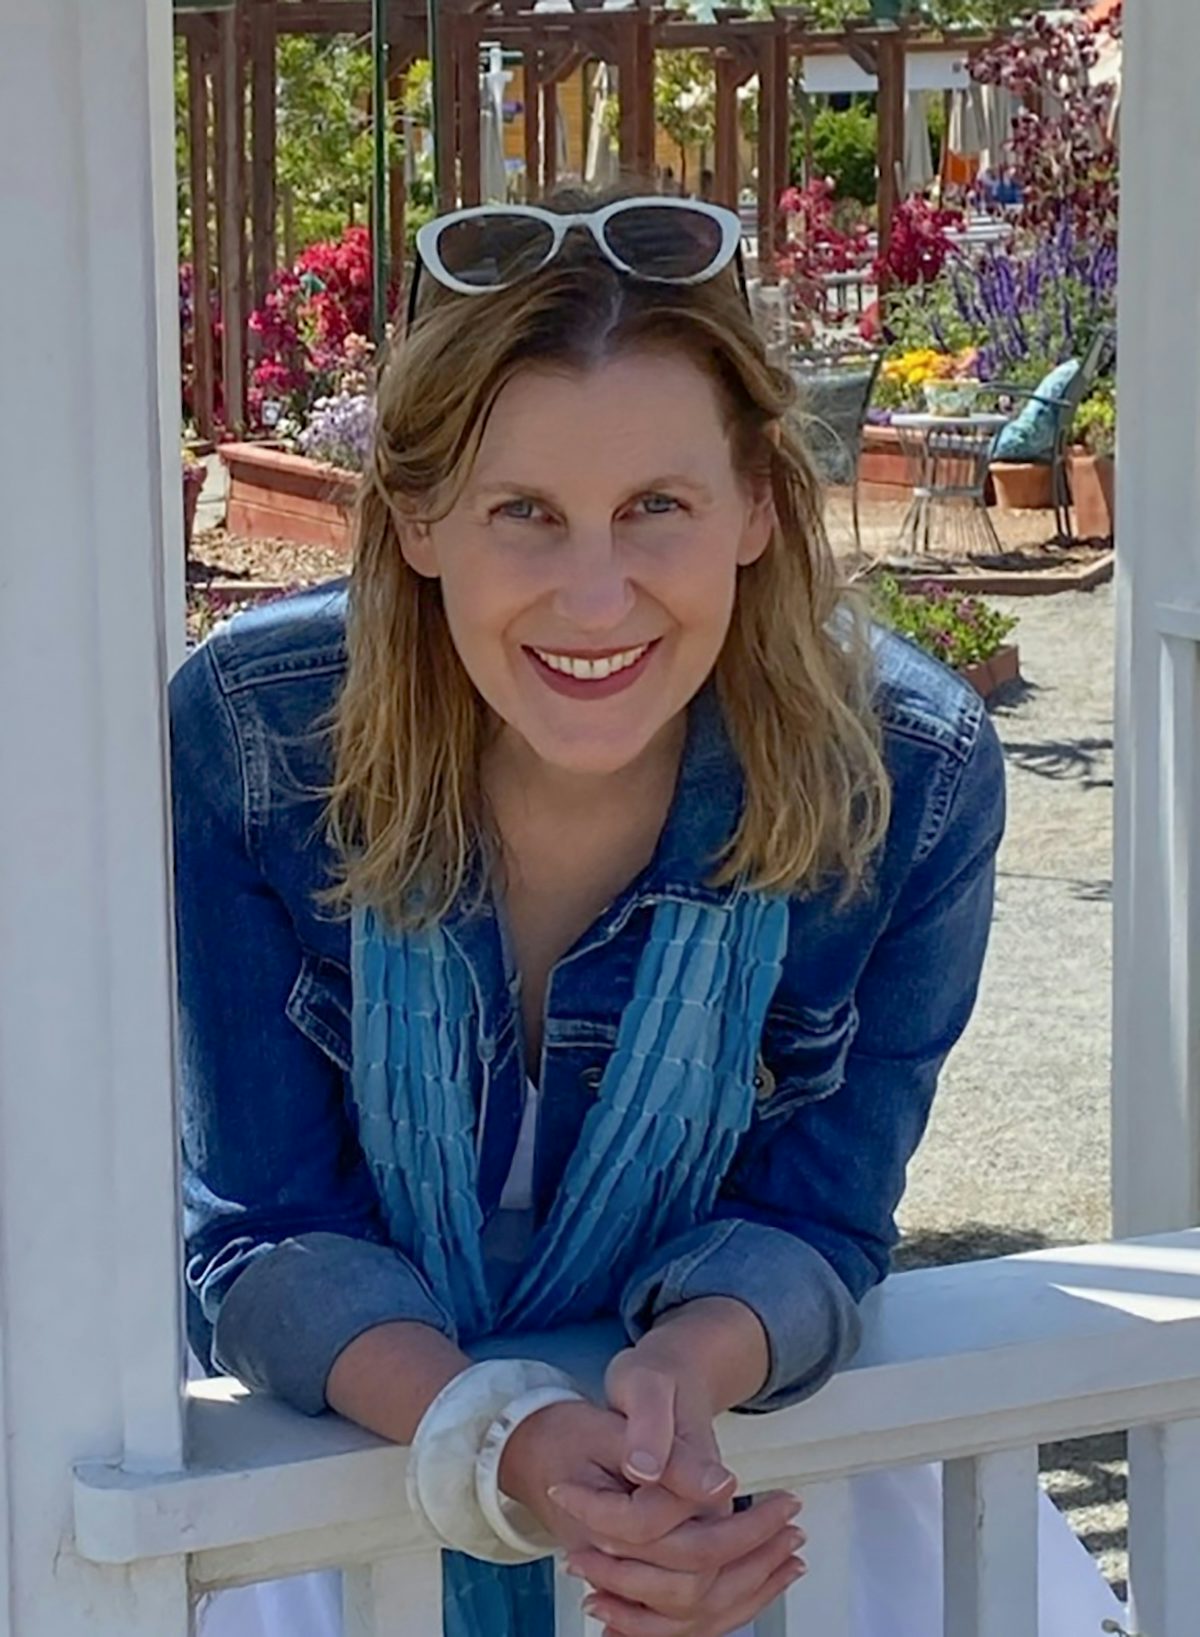 Fora travel agent Cara Todd wearing jean jacket, blue scarf and white sunglasses smiles with flowers in the background